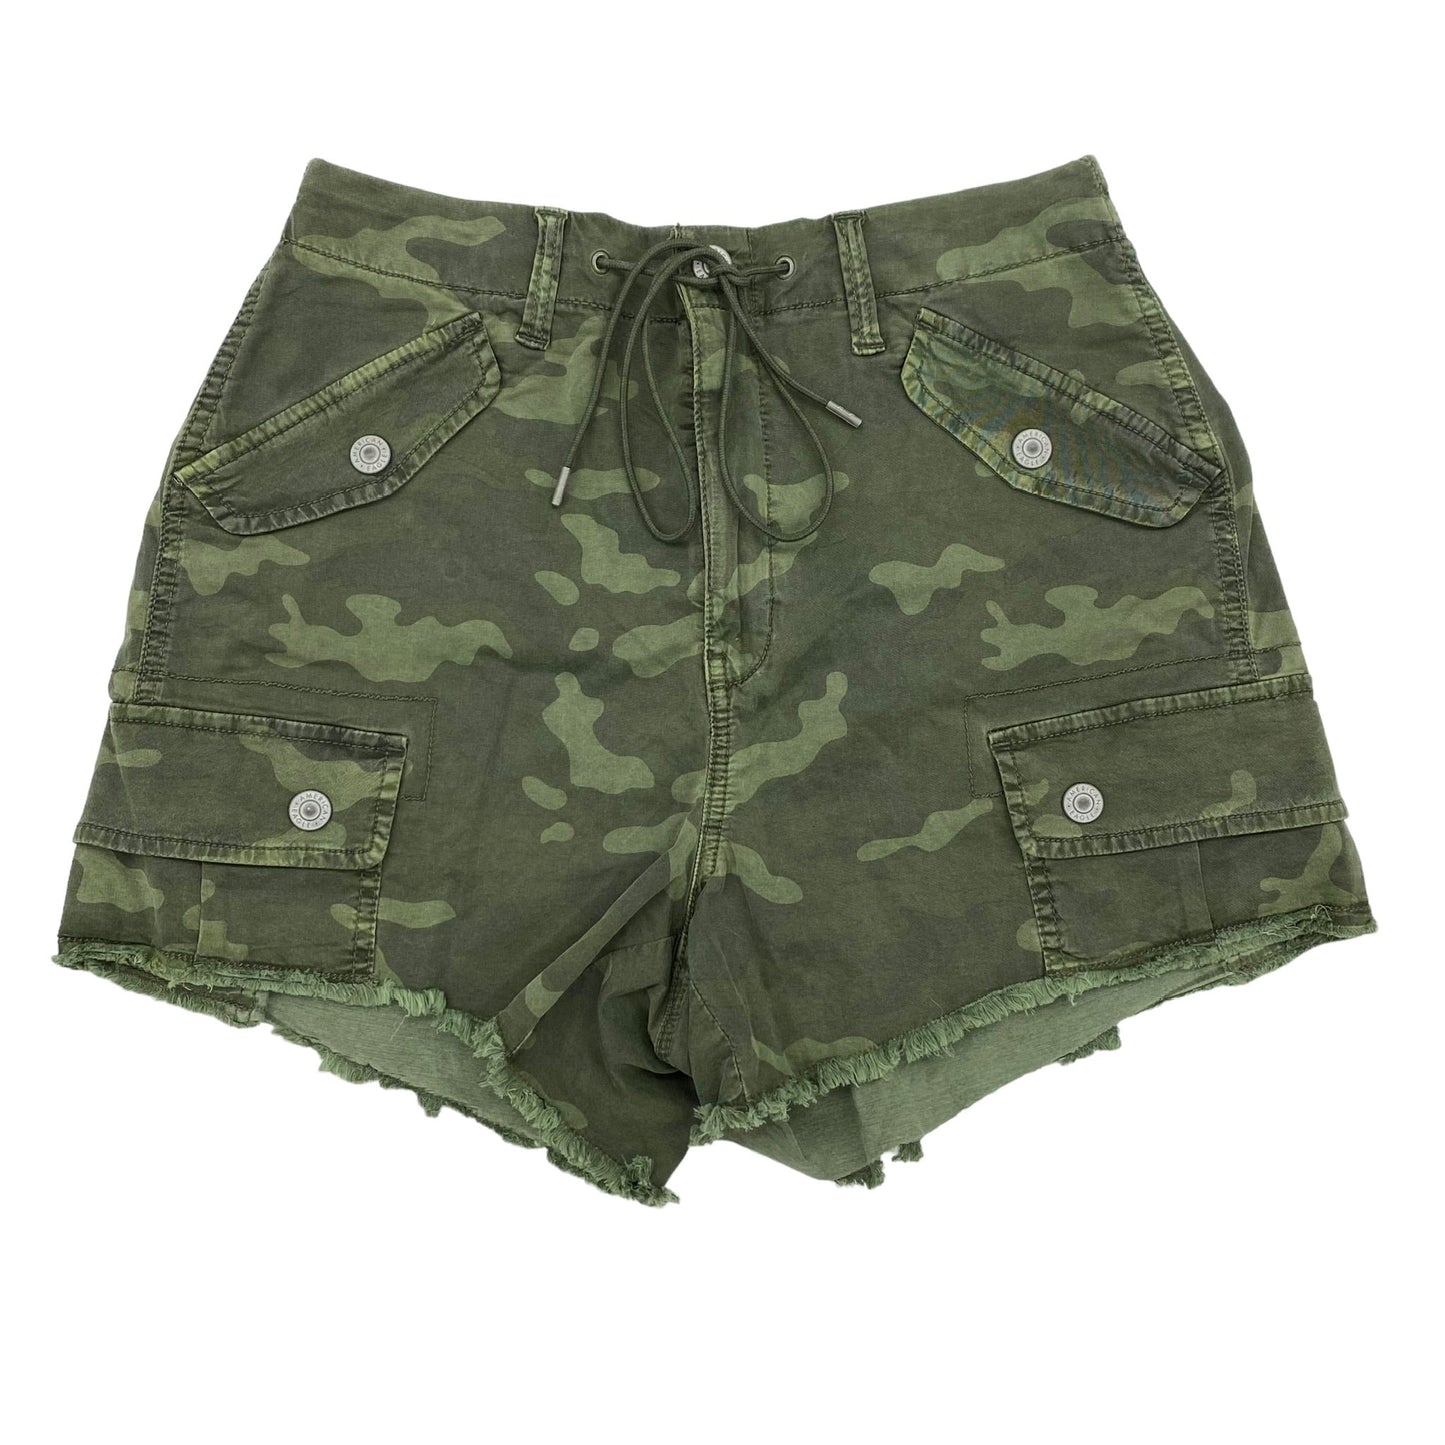 Camouflage Print Shorts American Eagle, Size 4